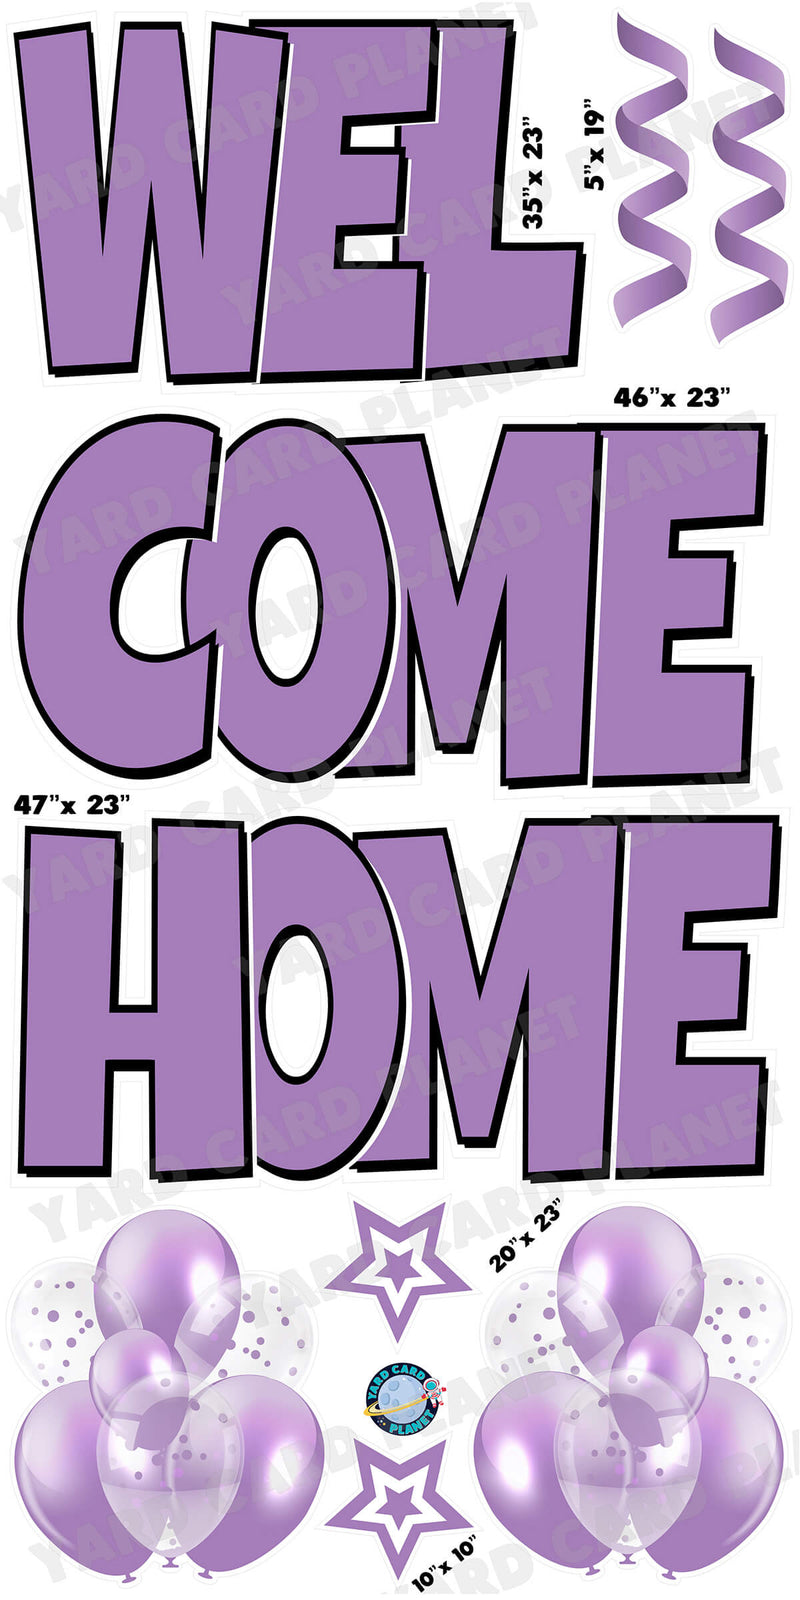 Large 23" Welcome Home Yard Card EZ Quick Sets in Luckiest Guy Font and Flair in Light Purple Solid Color